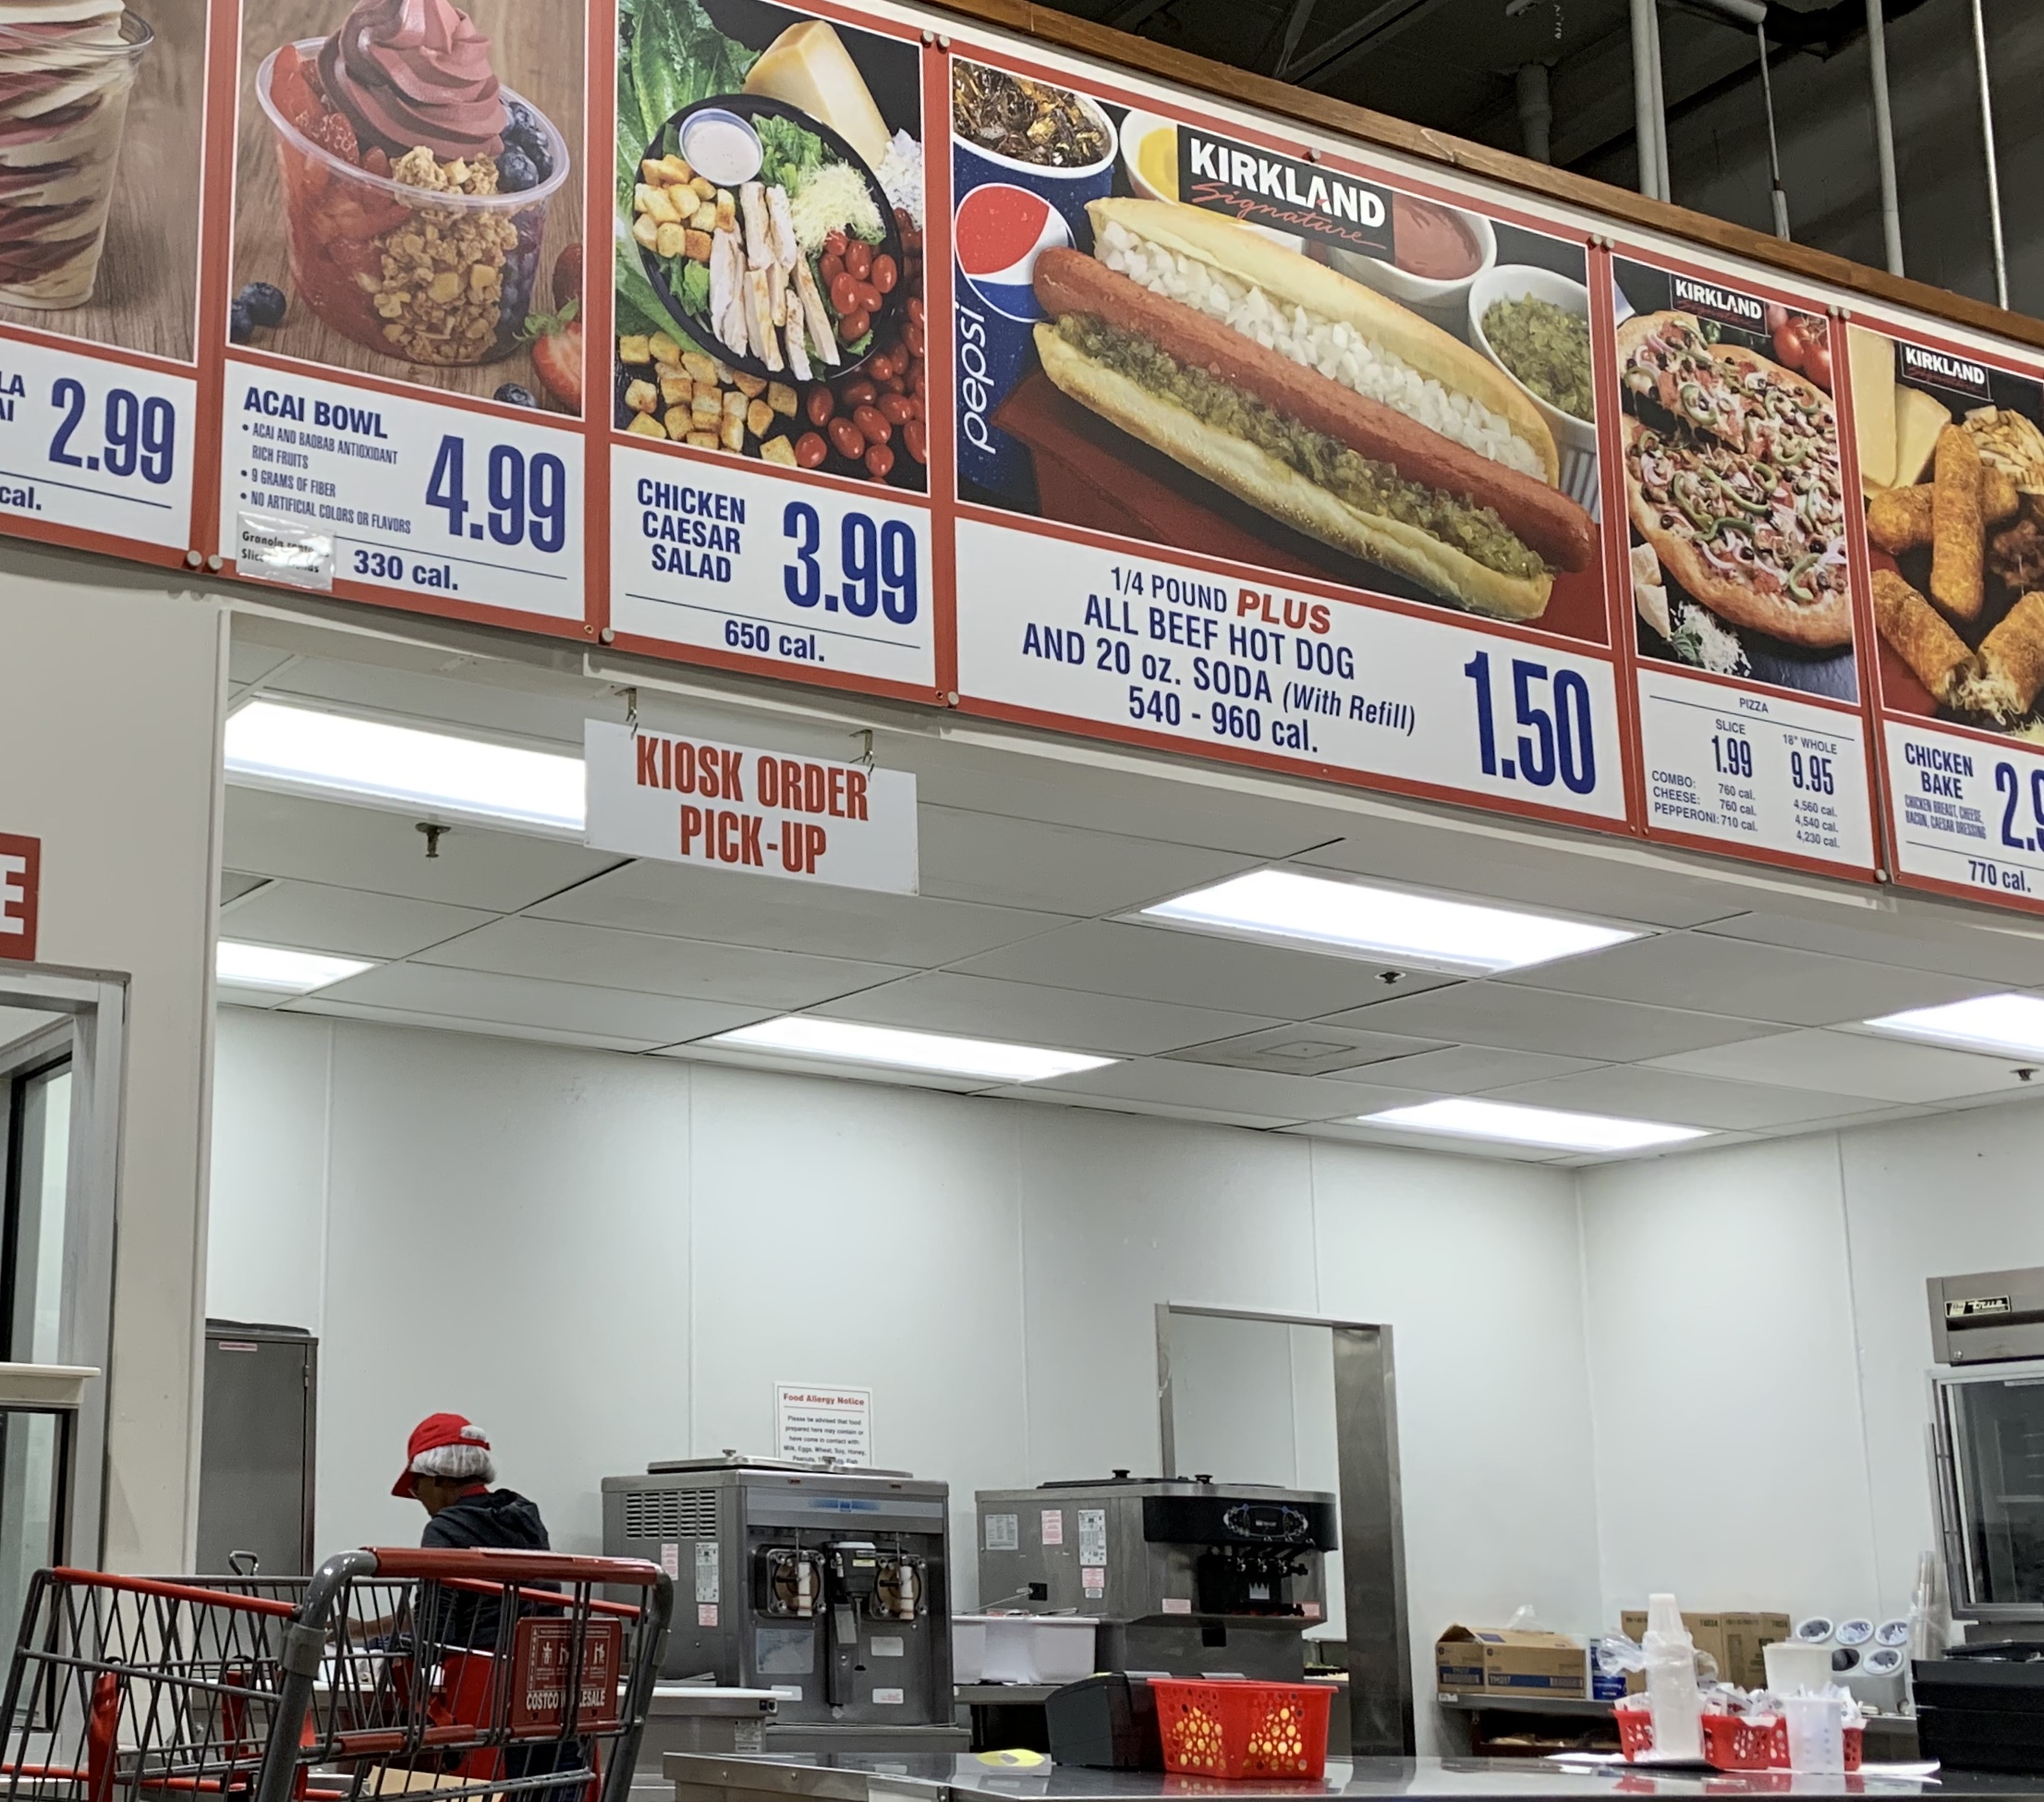 Costco Food Court: 5 top items to try before it becomes members-only -  